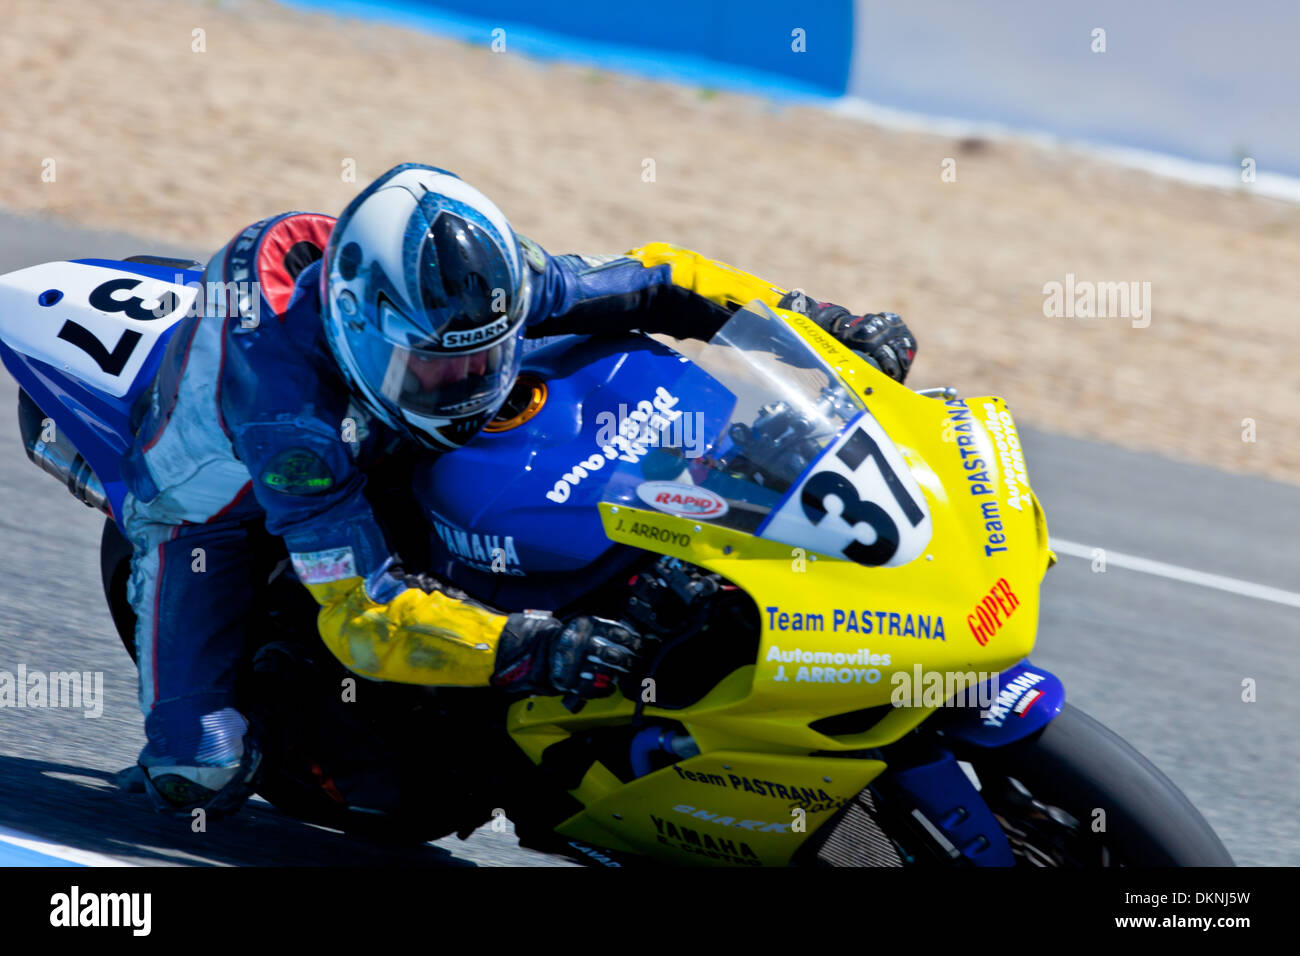 Stock Extreme motorcyclist Jorge Arroyo takes a curve in the CEV Championship race Stock Photo